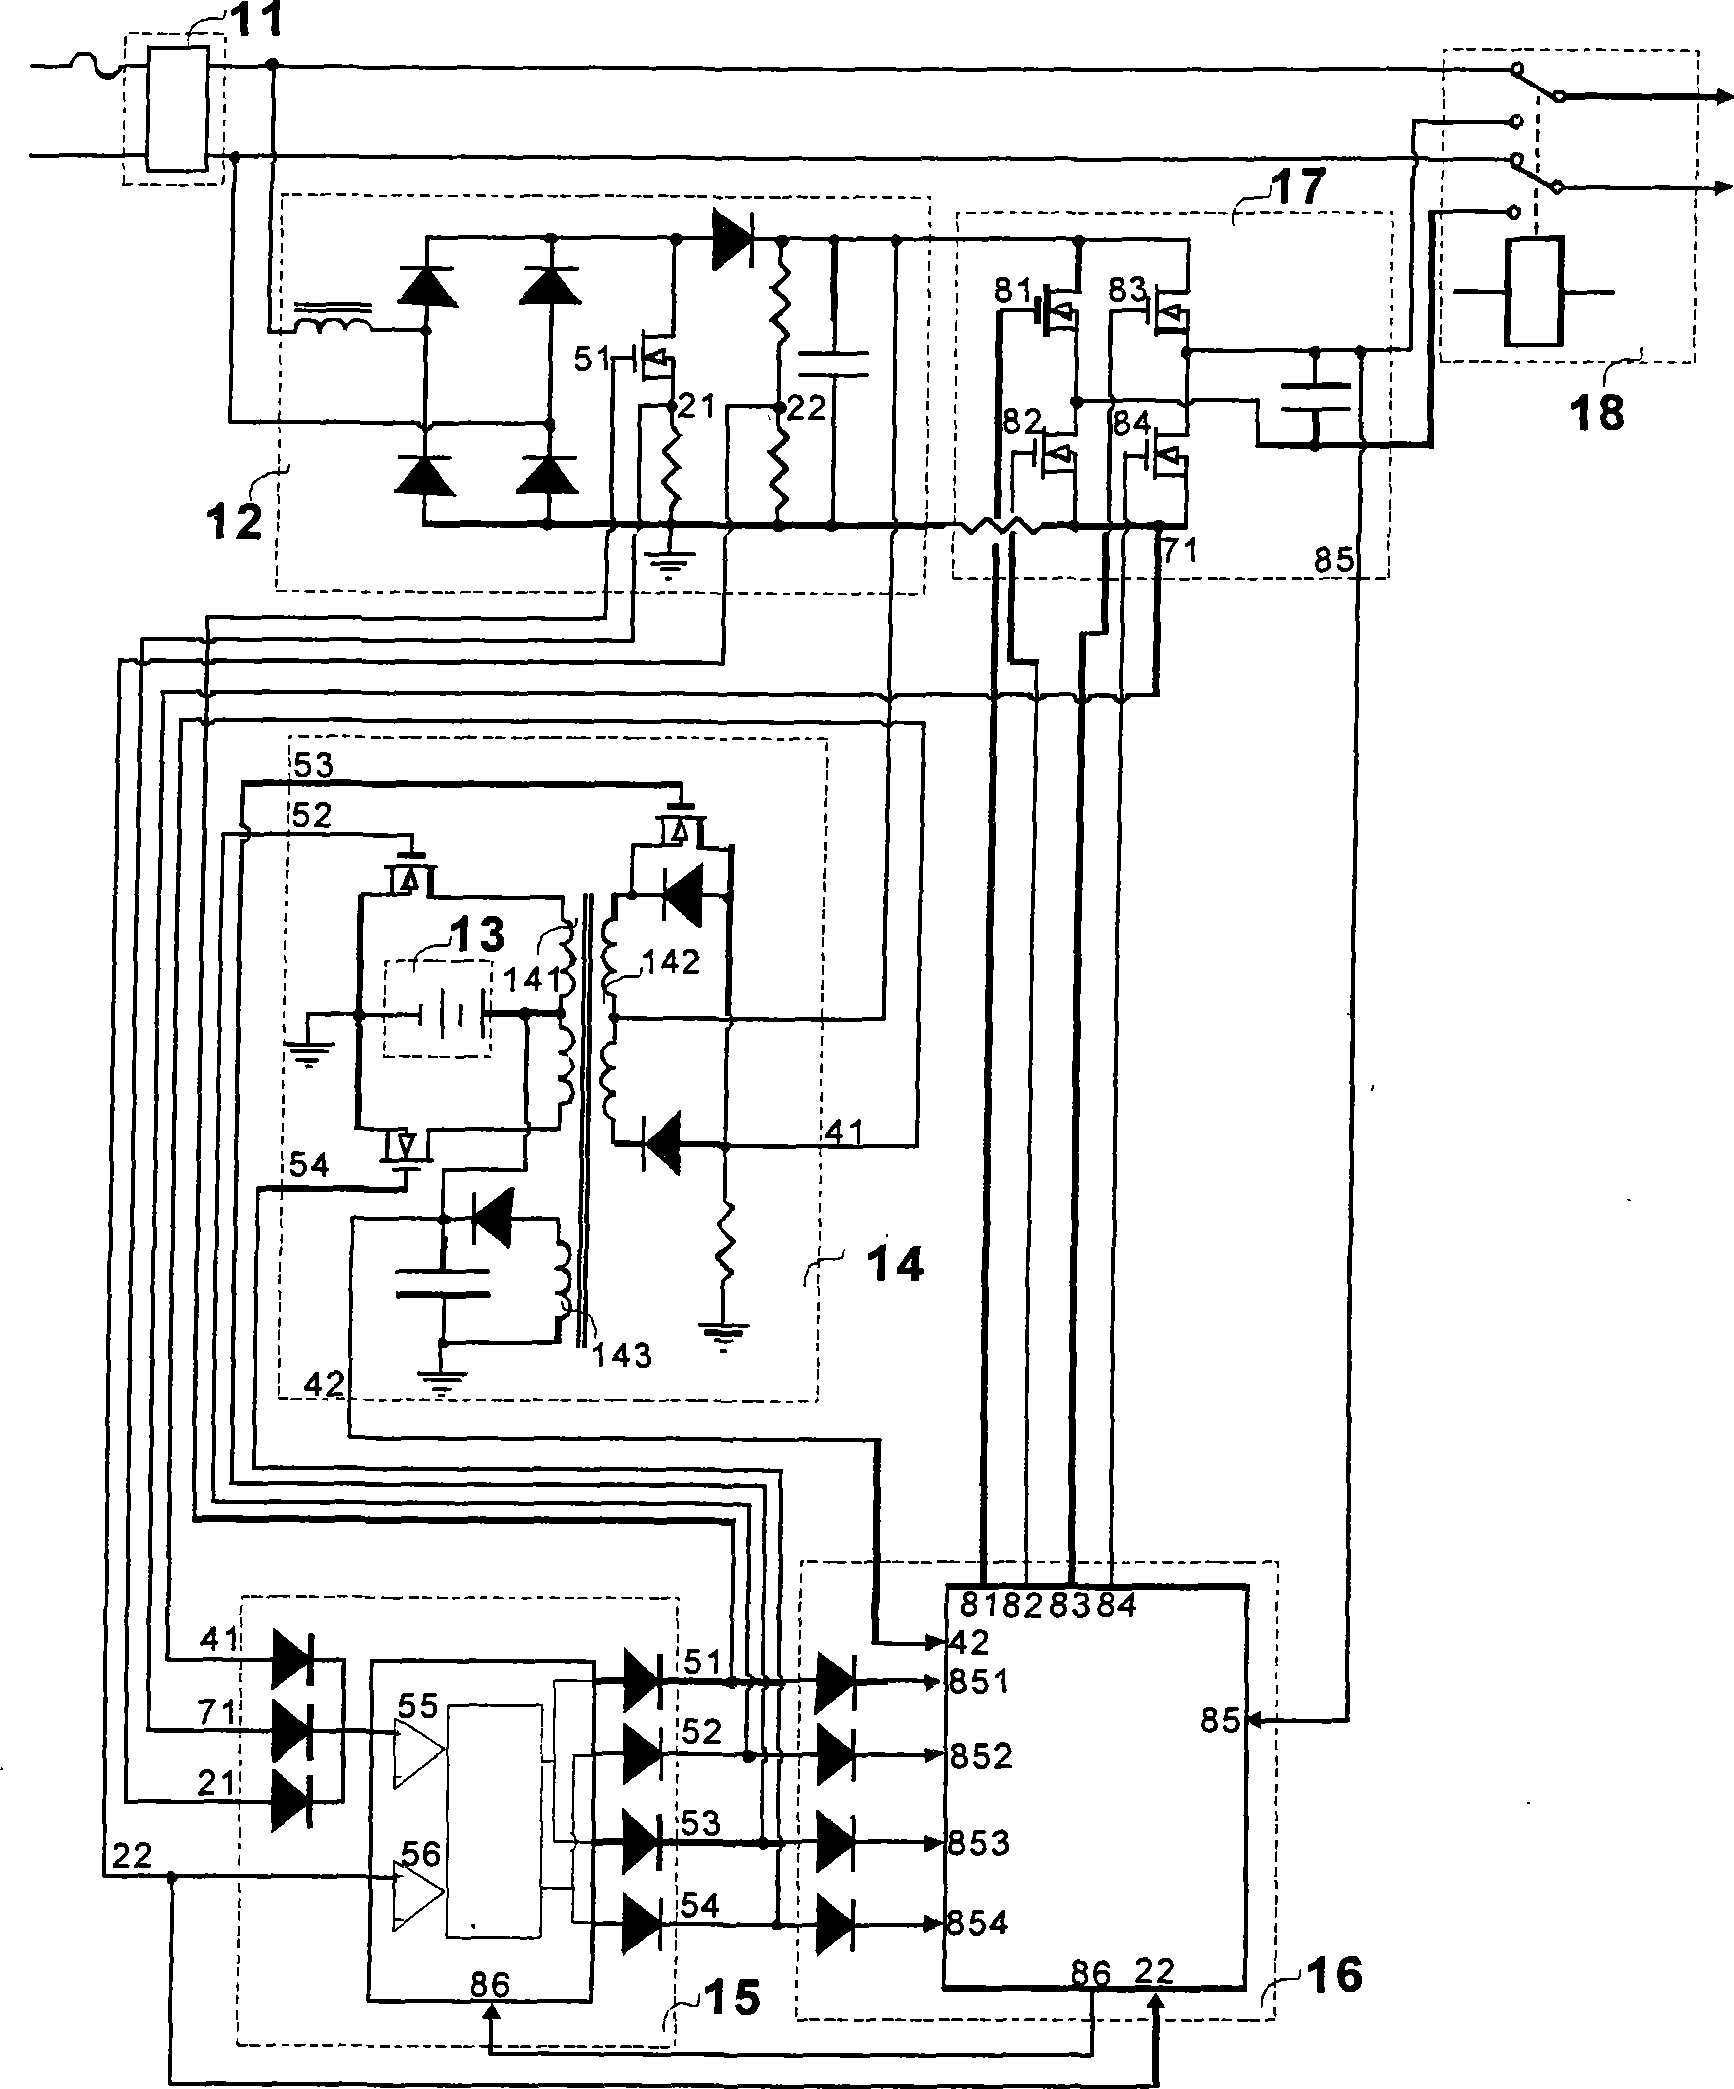 Off-line uninterrupted power supply device